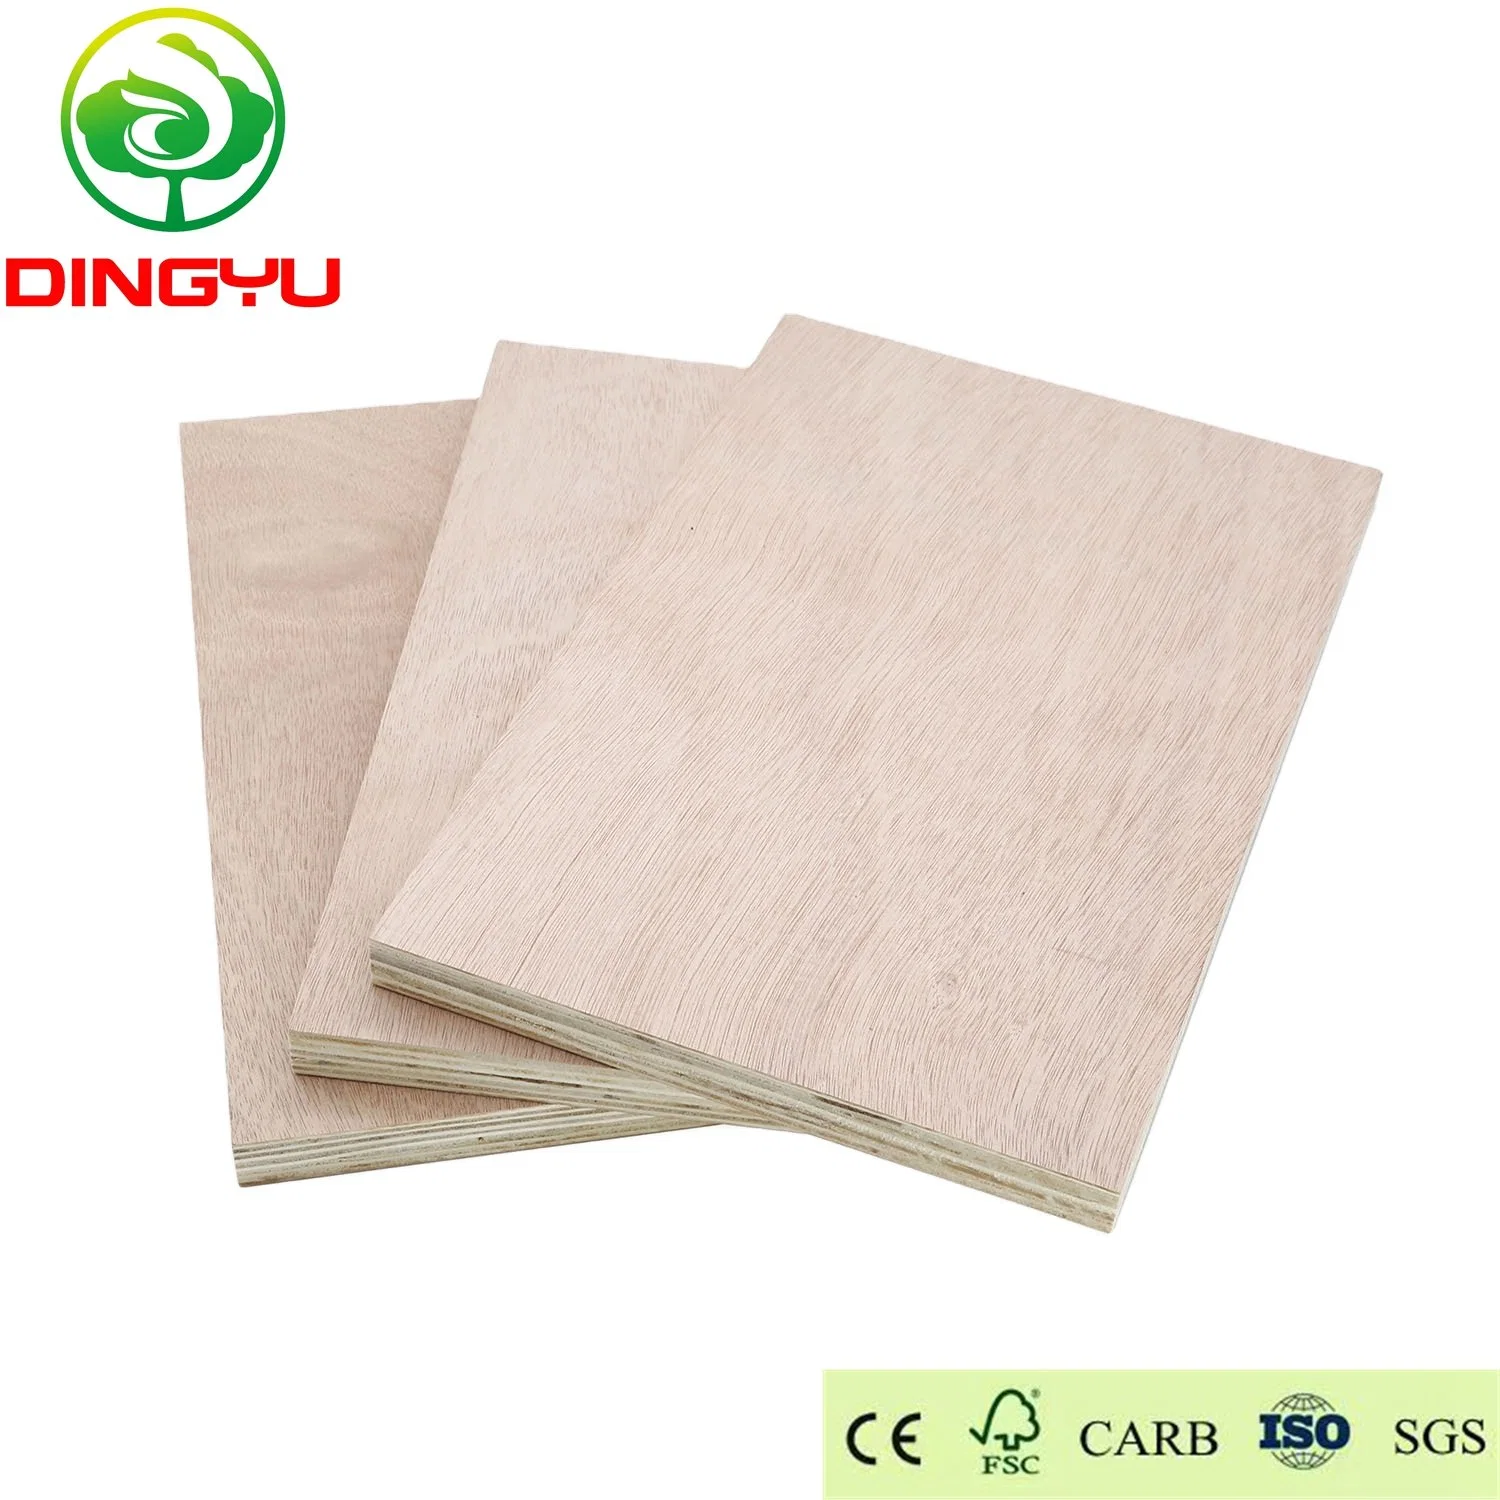 Commercial Timber Poplar / Birch / Pine Plywood for Furniture